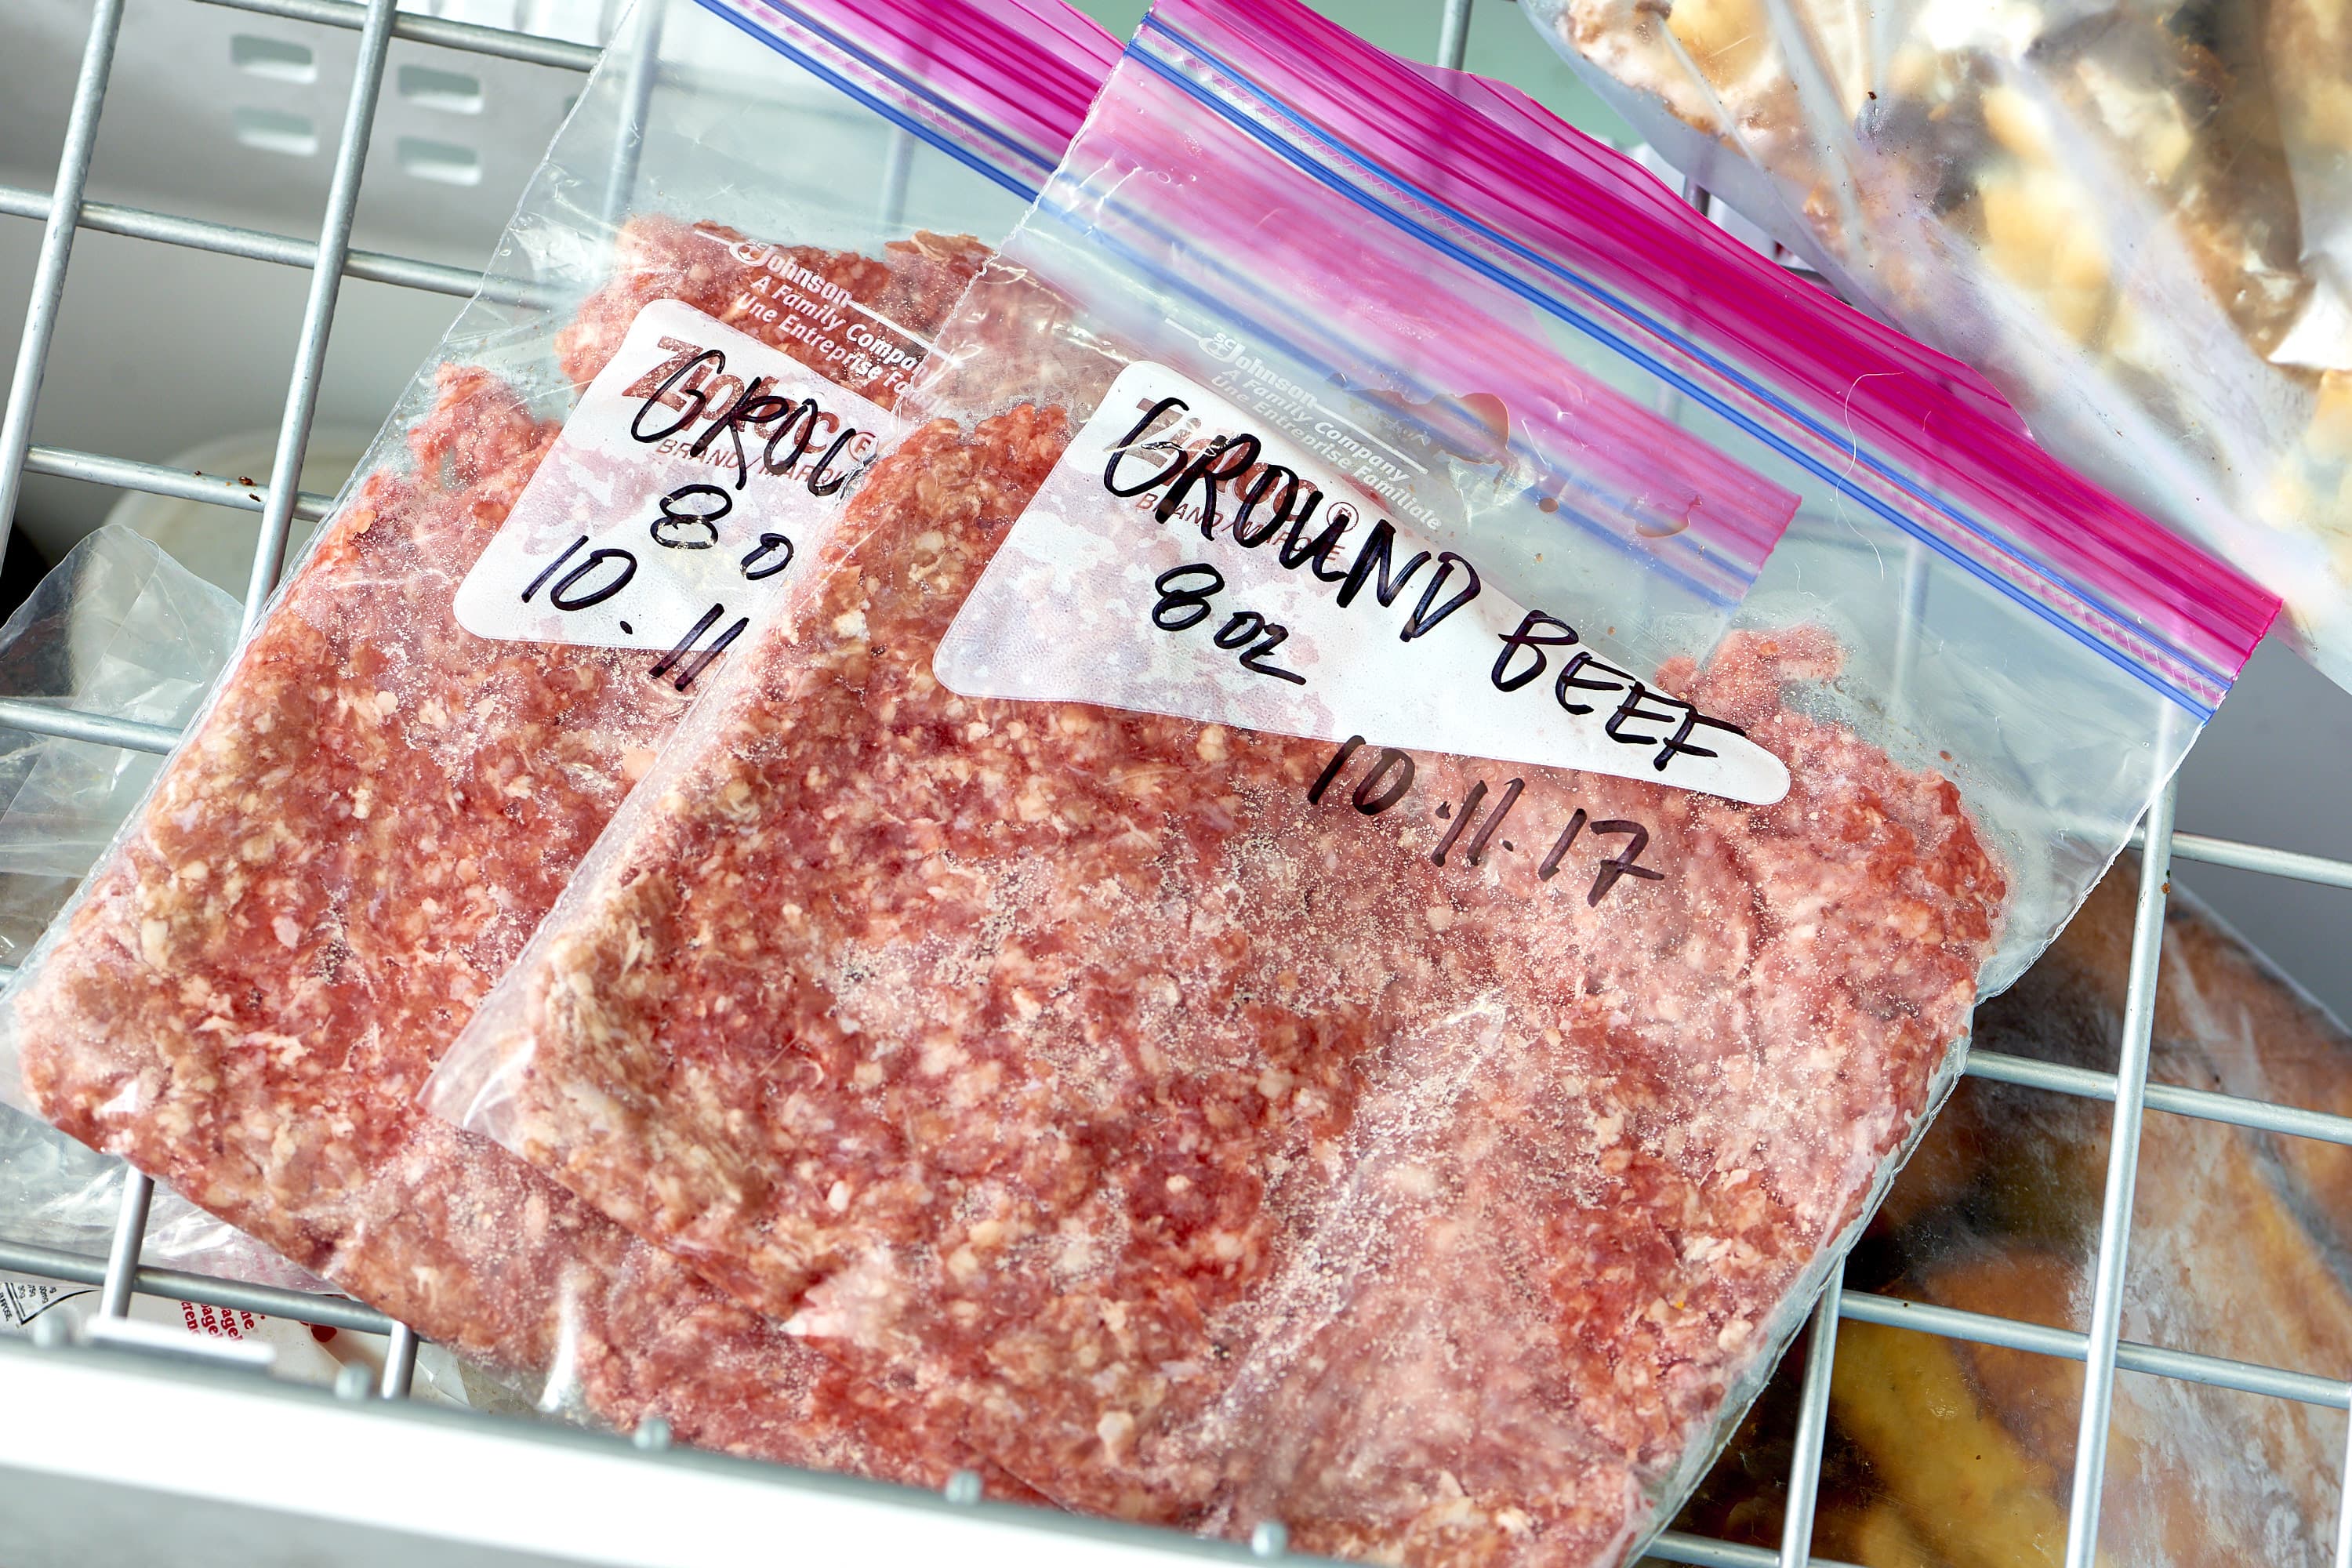 When buying meat on sale, what is the best way to repackage it and freeze  it? - Quora